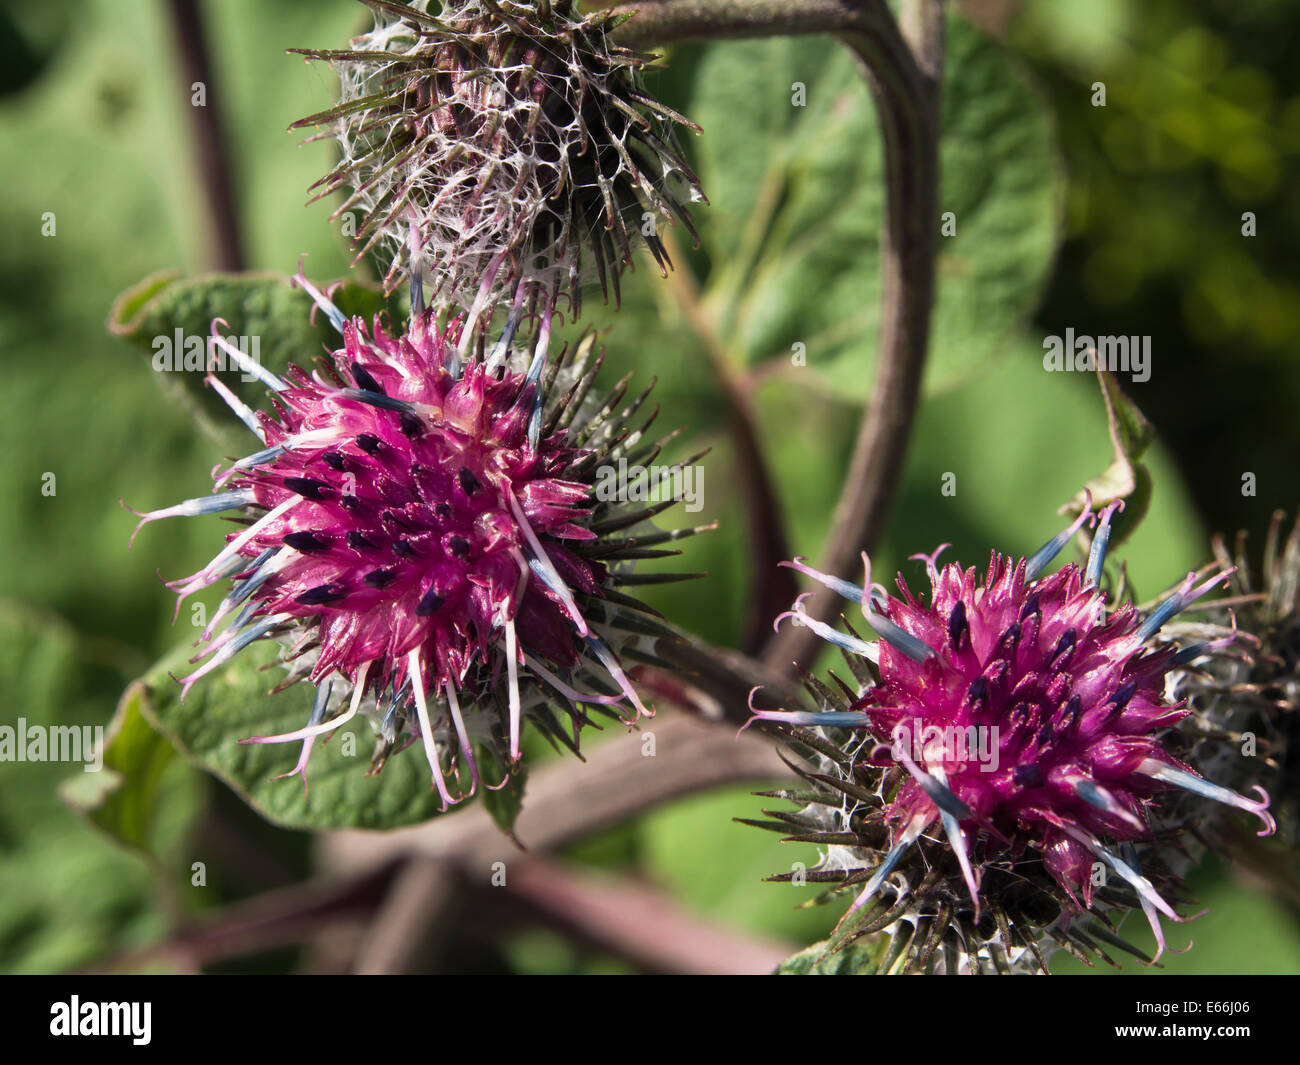 Arctium lappa,  greater burdock (or possibly Arctium minus) common along the road in Oslo Norway Stock Photo